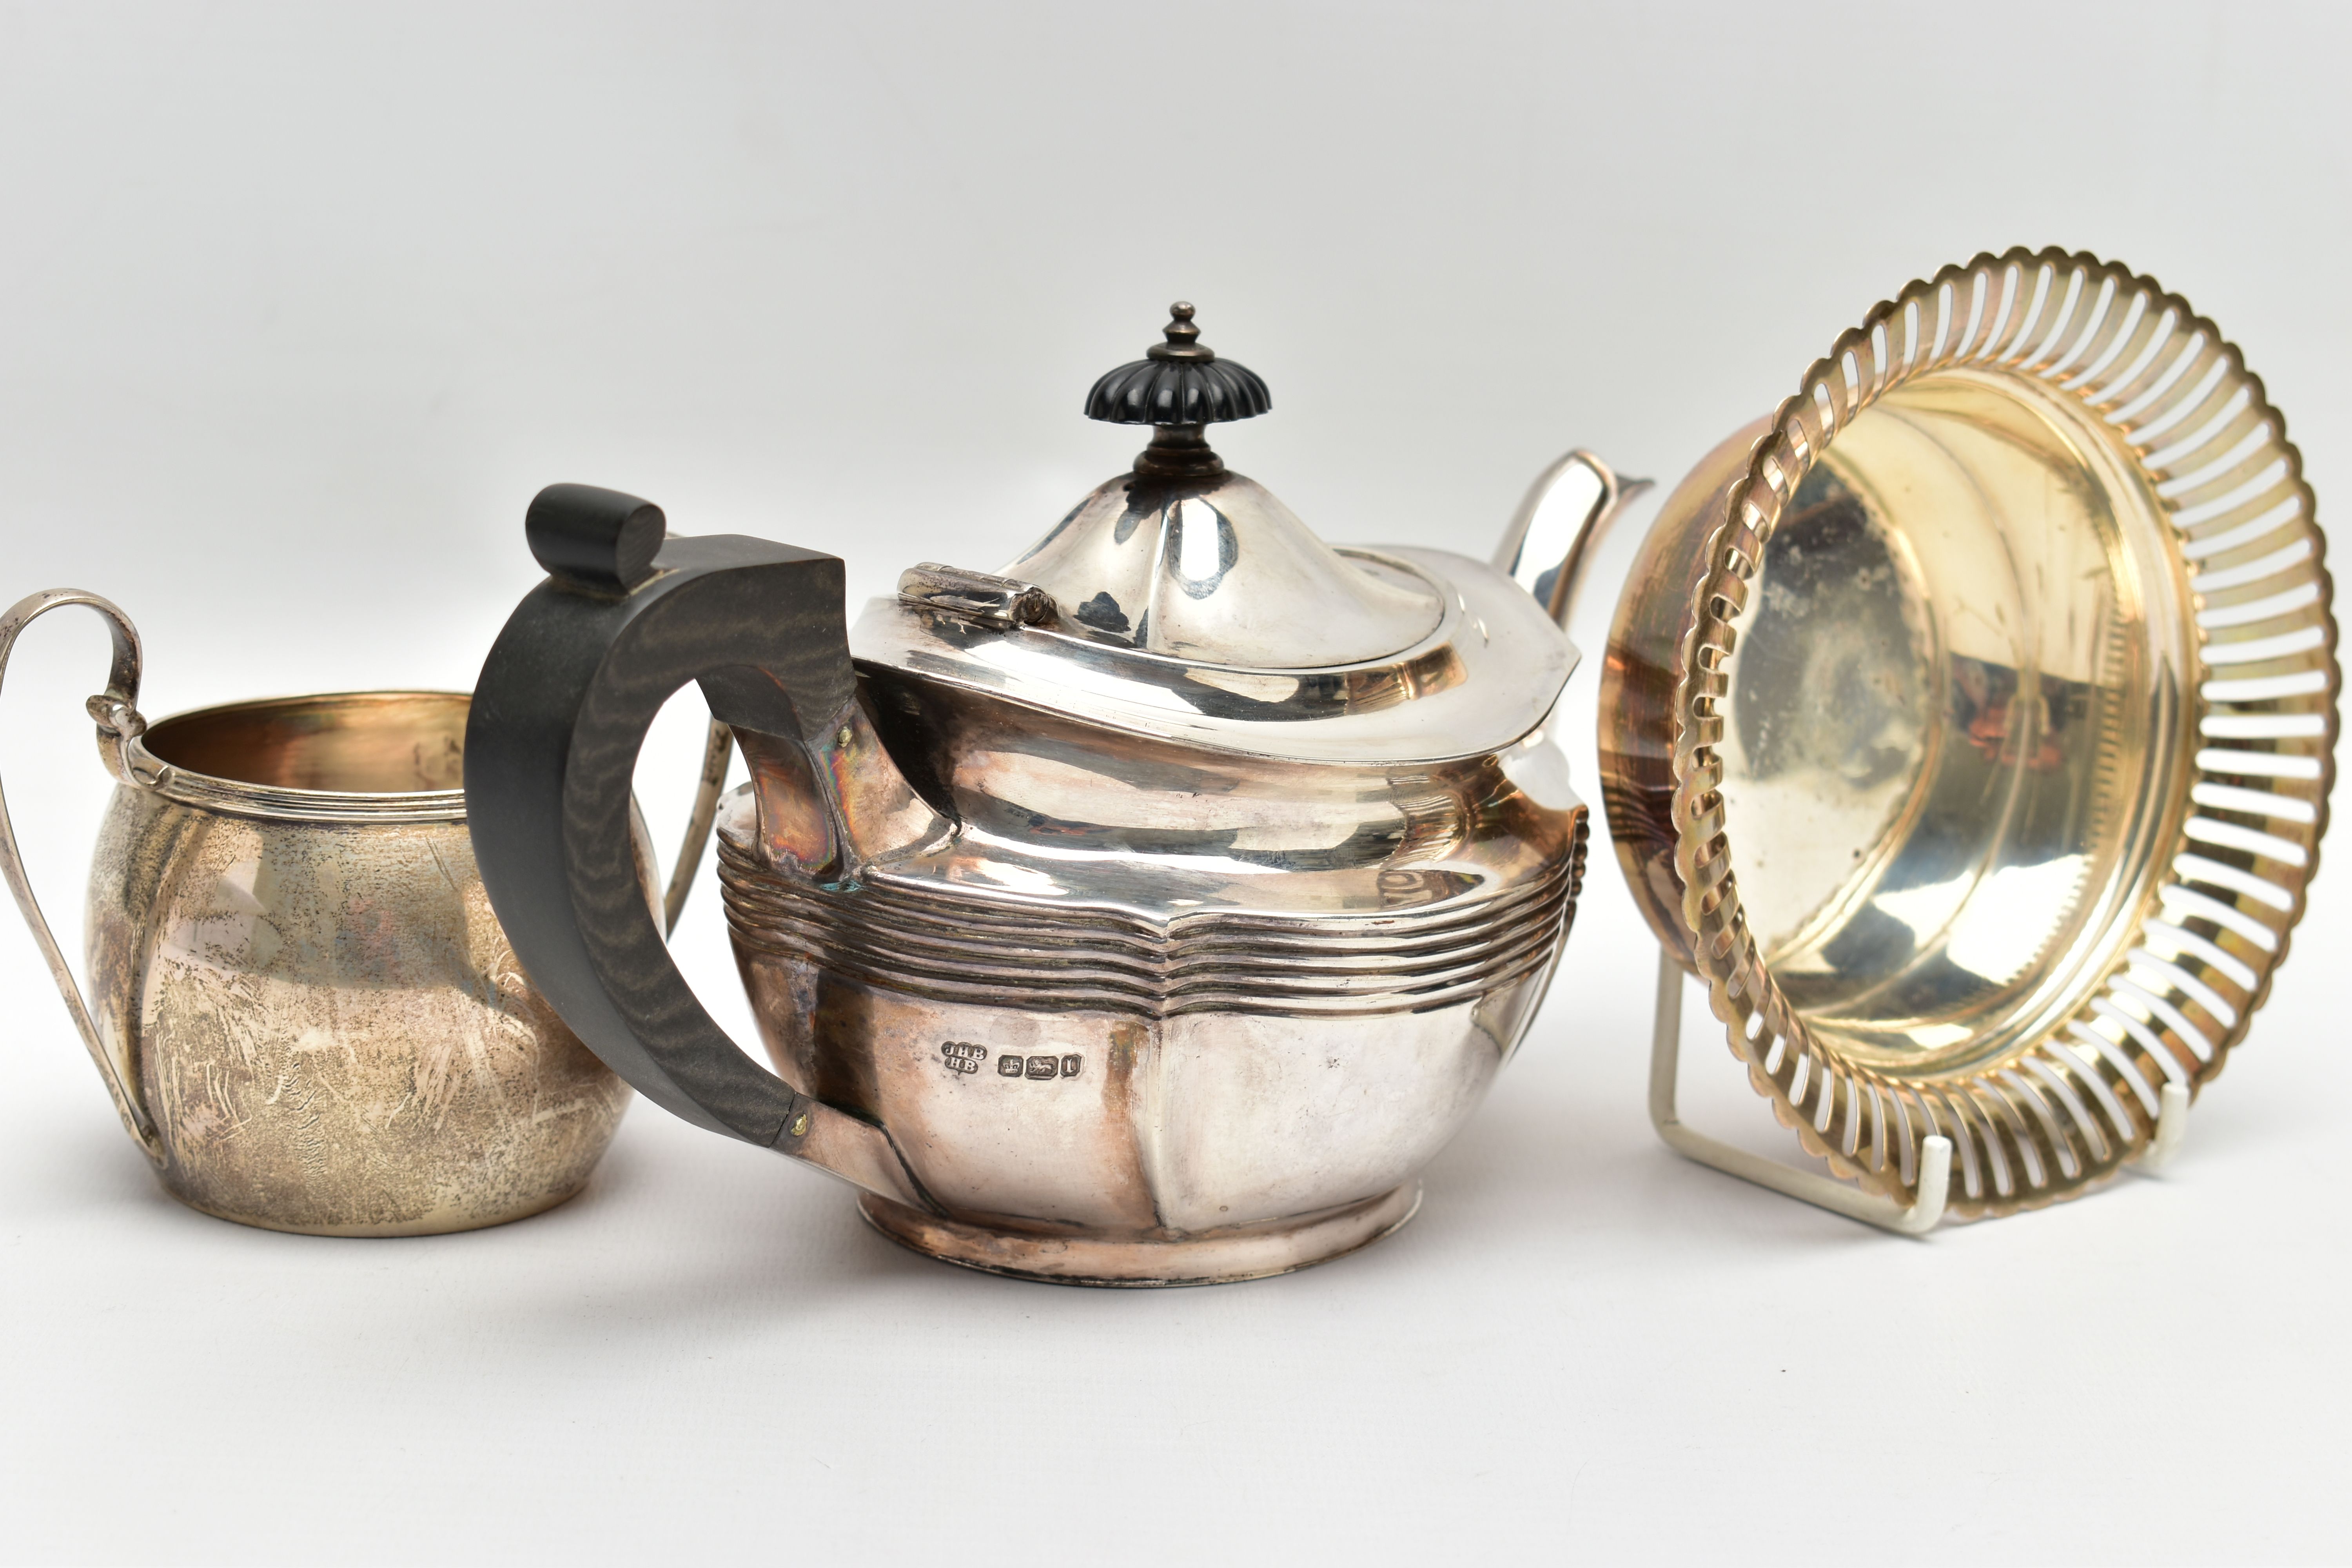 AN EDWARDIAN SILVER BACHELOR'S TEA POT OF SHAPED OVAL FORM, A TWIN HANDLED SILVER SUGAR BOWL AND A - Image 3 of 9